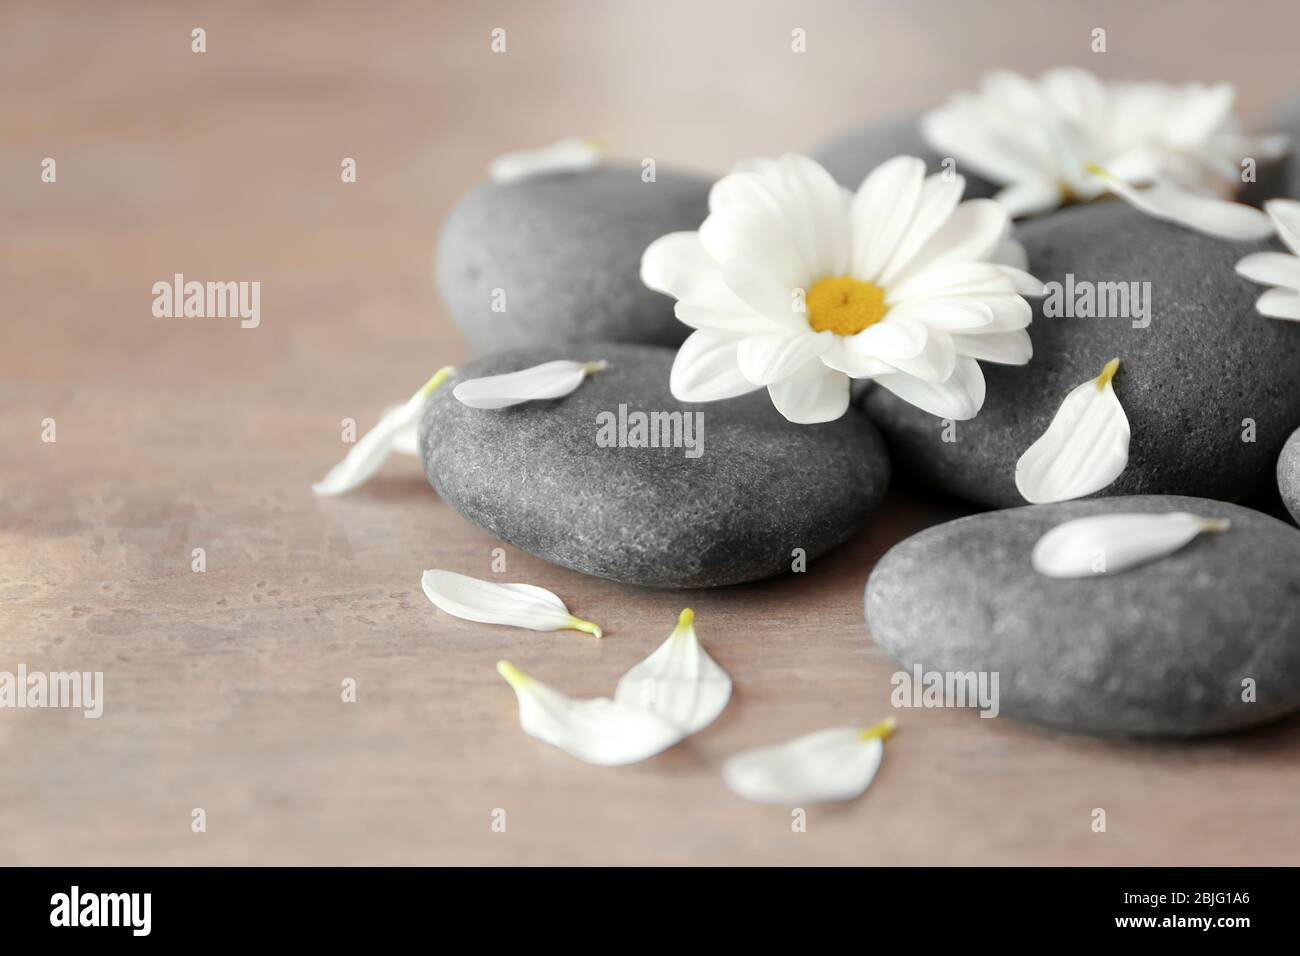 Spa stones and chrysanthemum on textured background Stock Photo